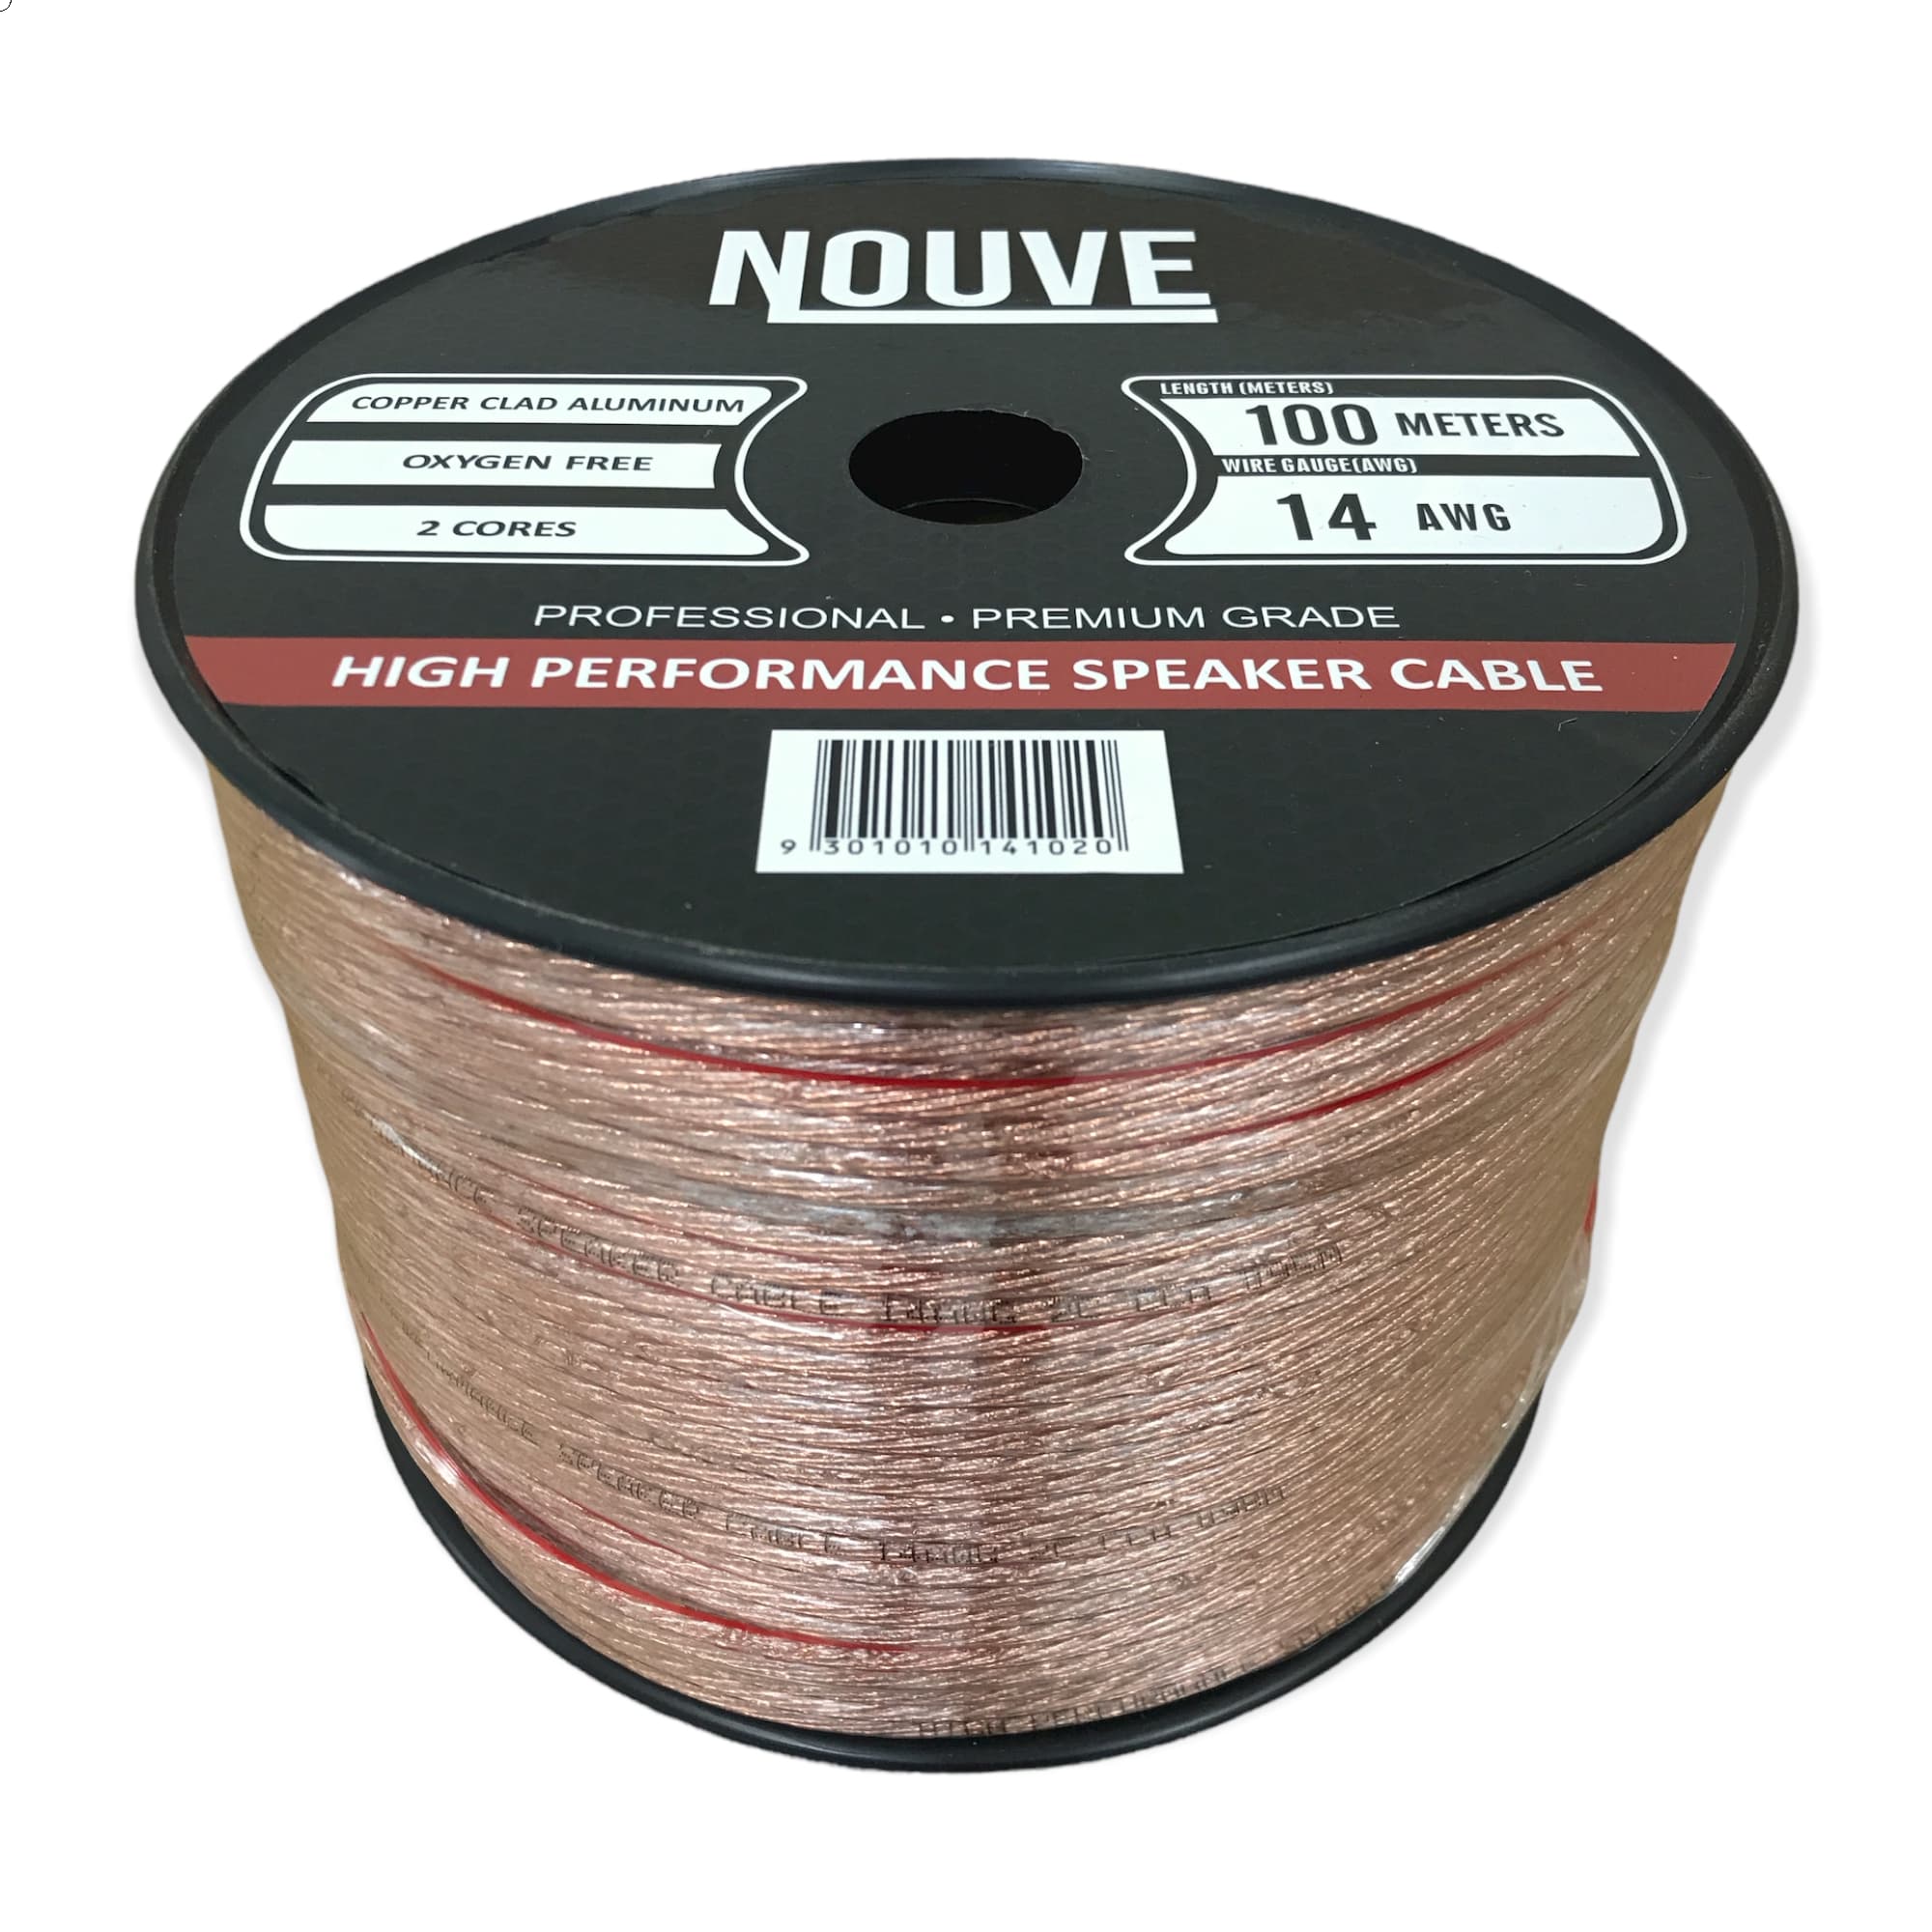 14 awg speaker cable cca 100m